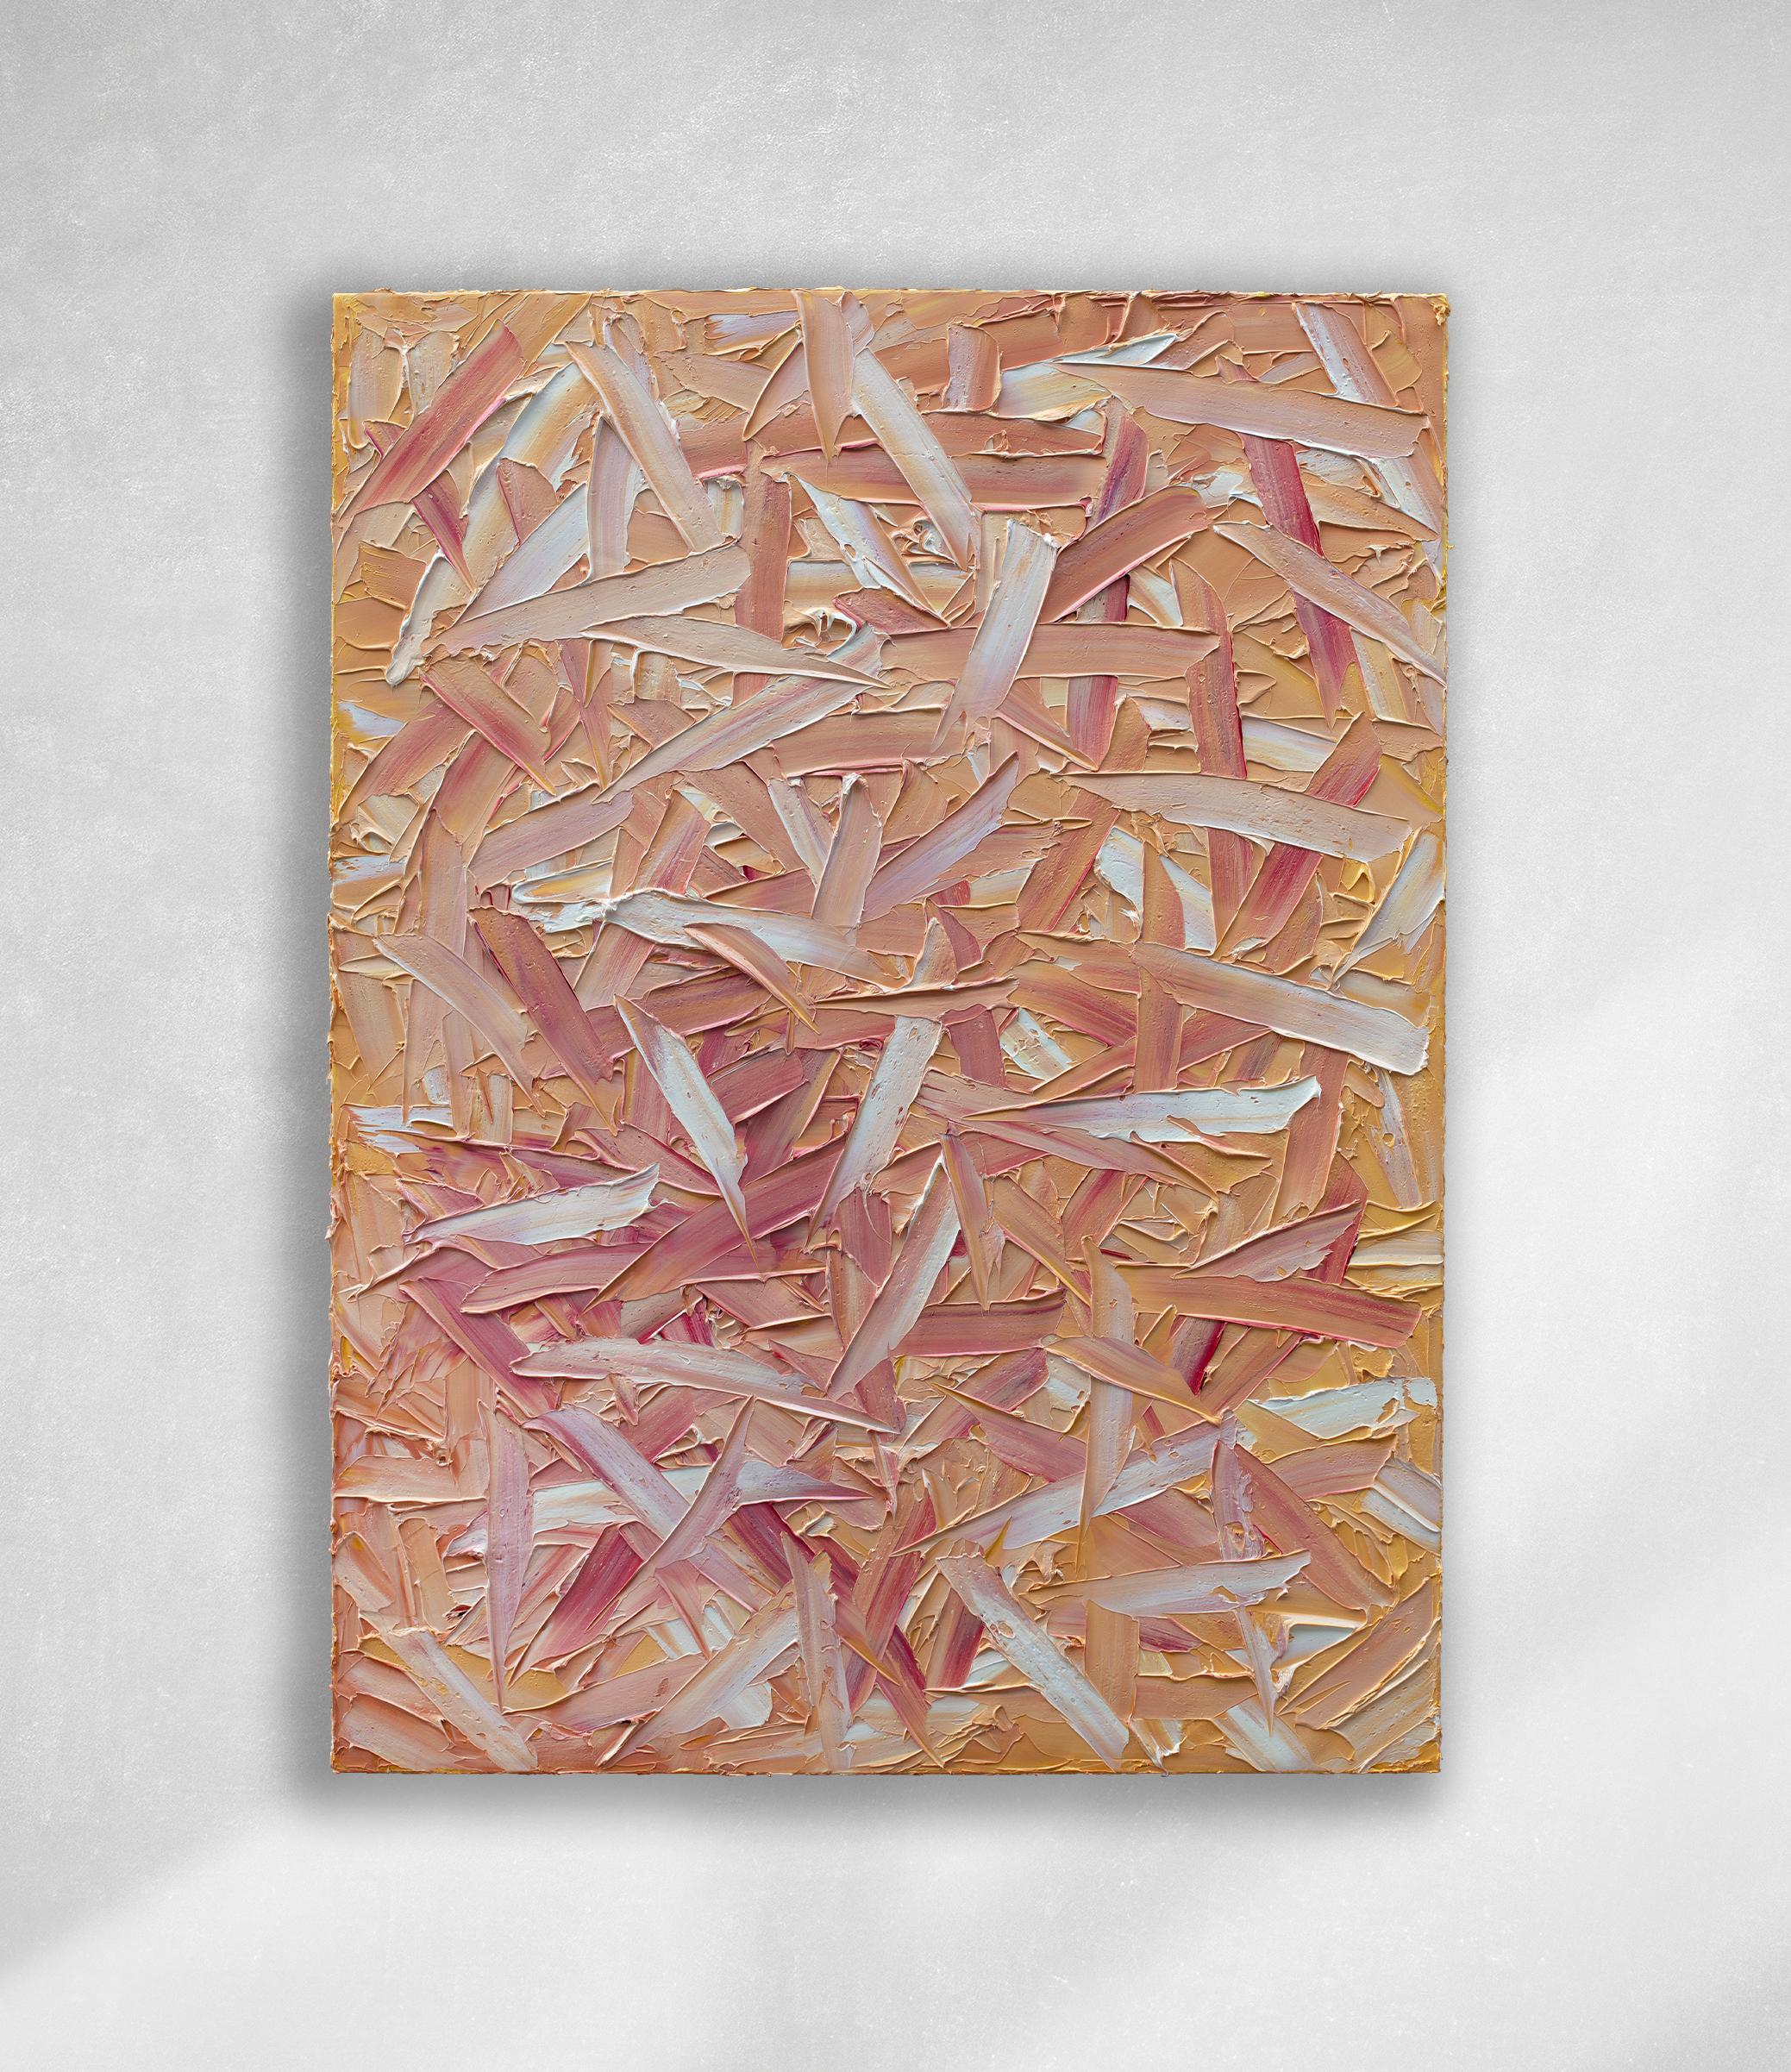 This textured abstract painting by Teodora Guererra features a warm orange and red palette with subtle white accents. The artist applies paint in thick layers and wide, energetic strokes layered across the canvas. The painting is signed on the back